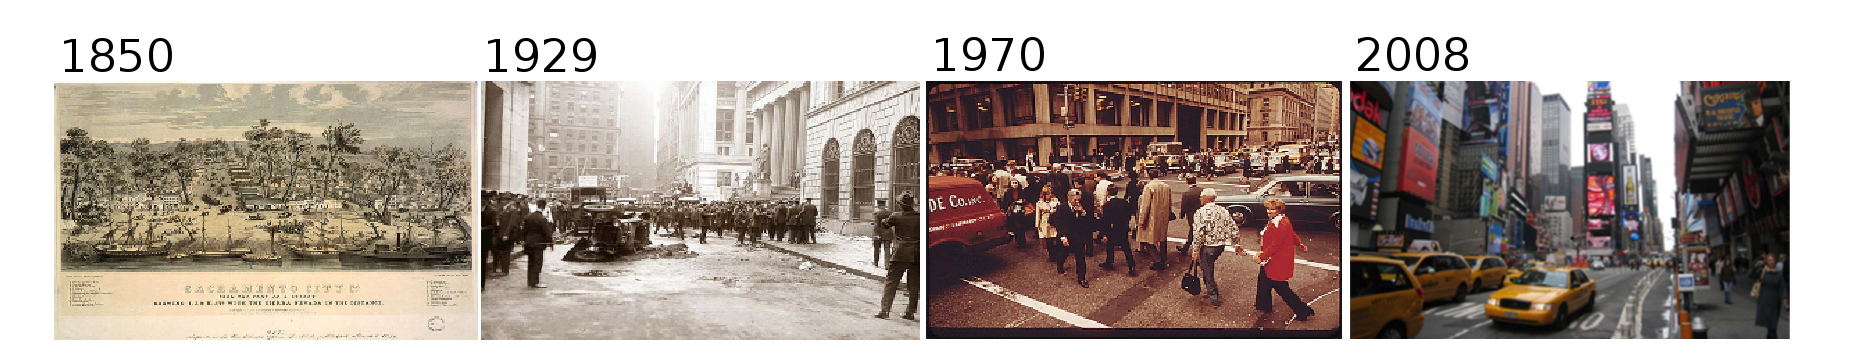 Views of New York in 1850, 1929, 1970 and 2008